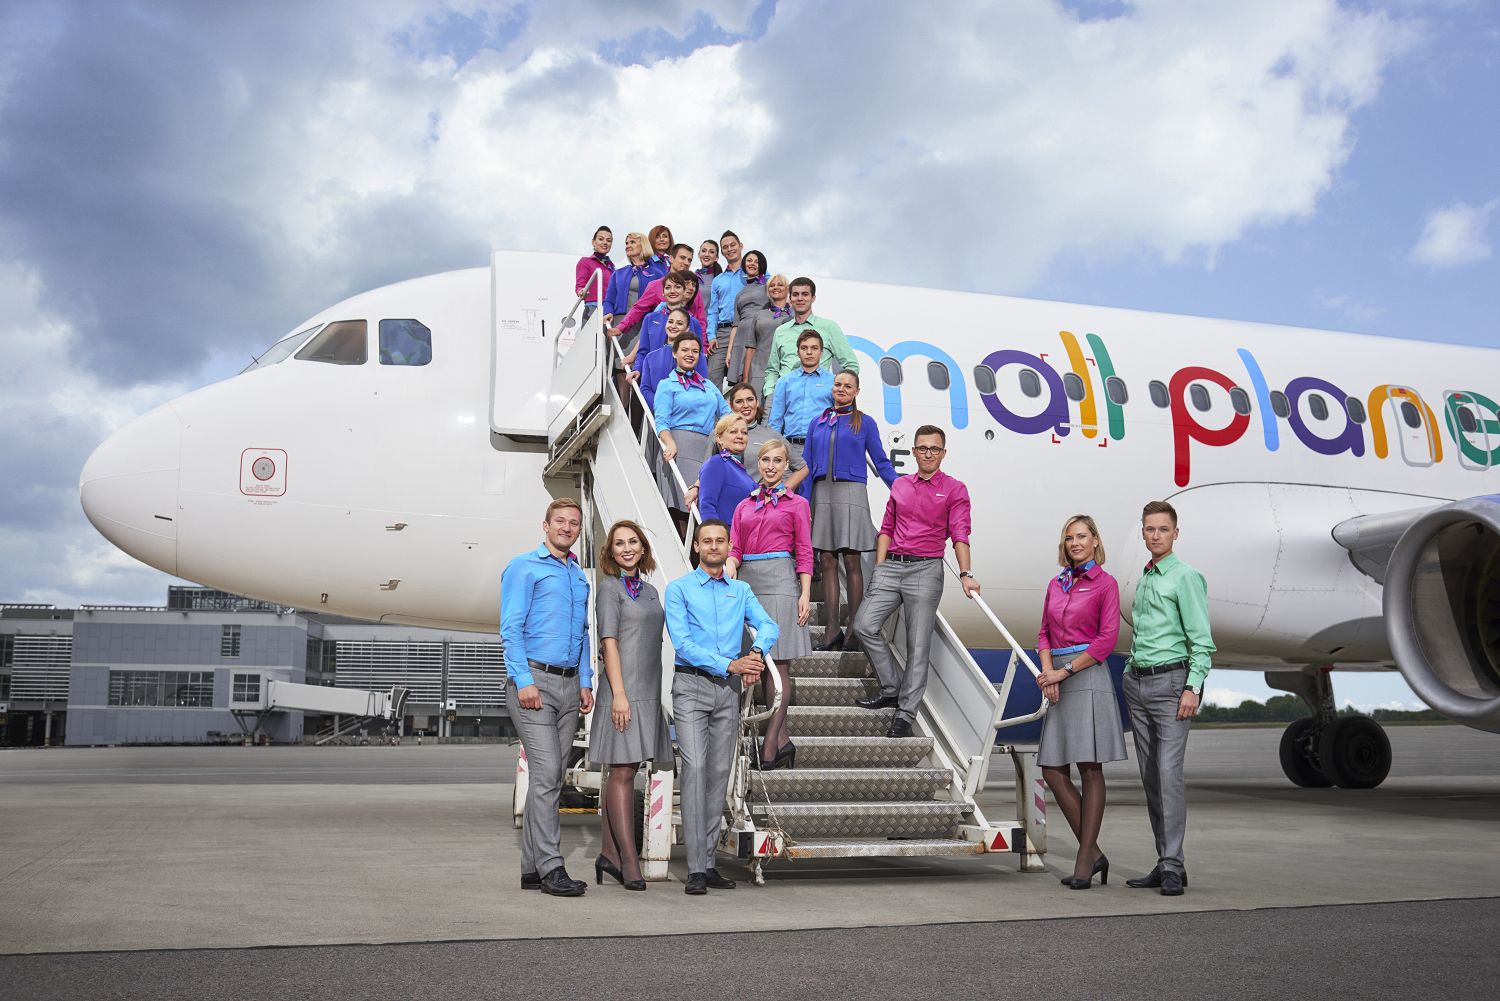 What flights does Small Planet Airlines provide?